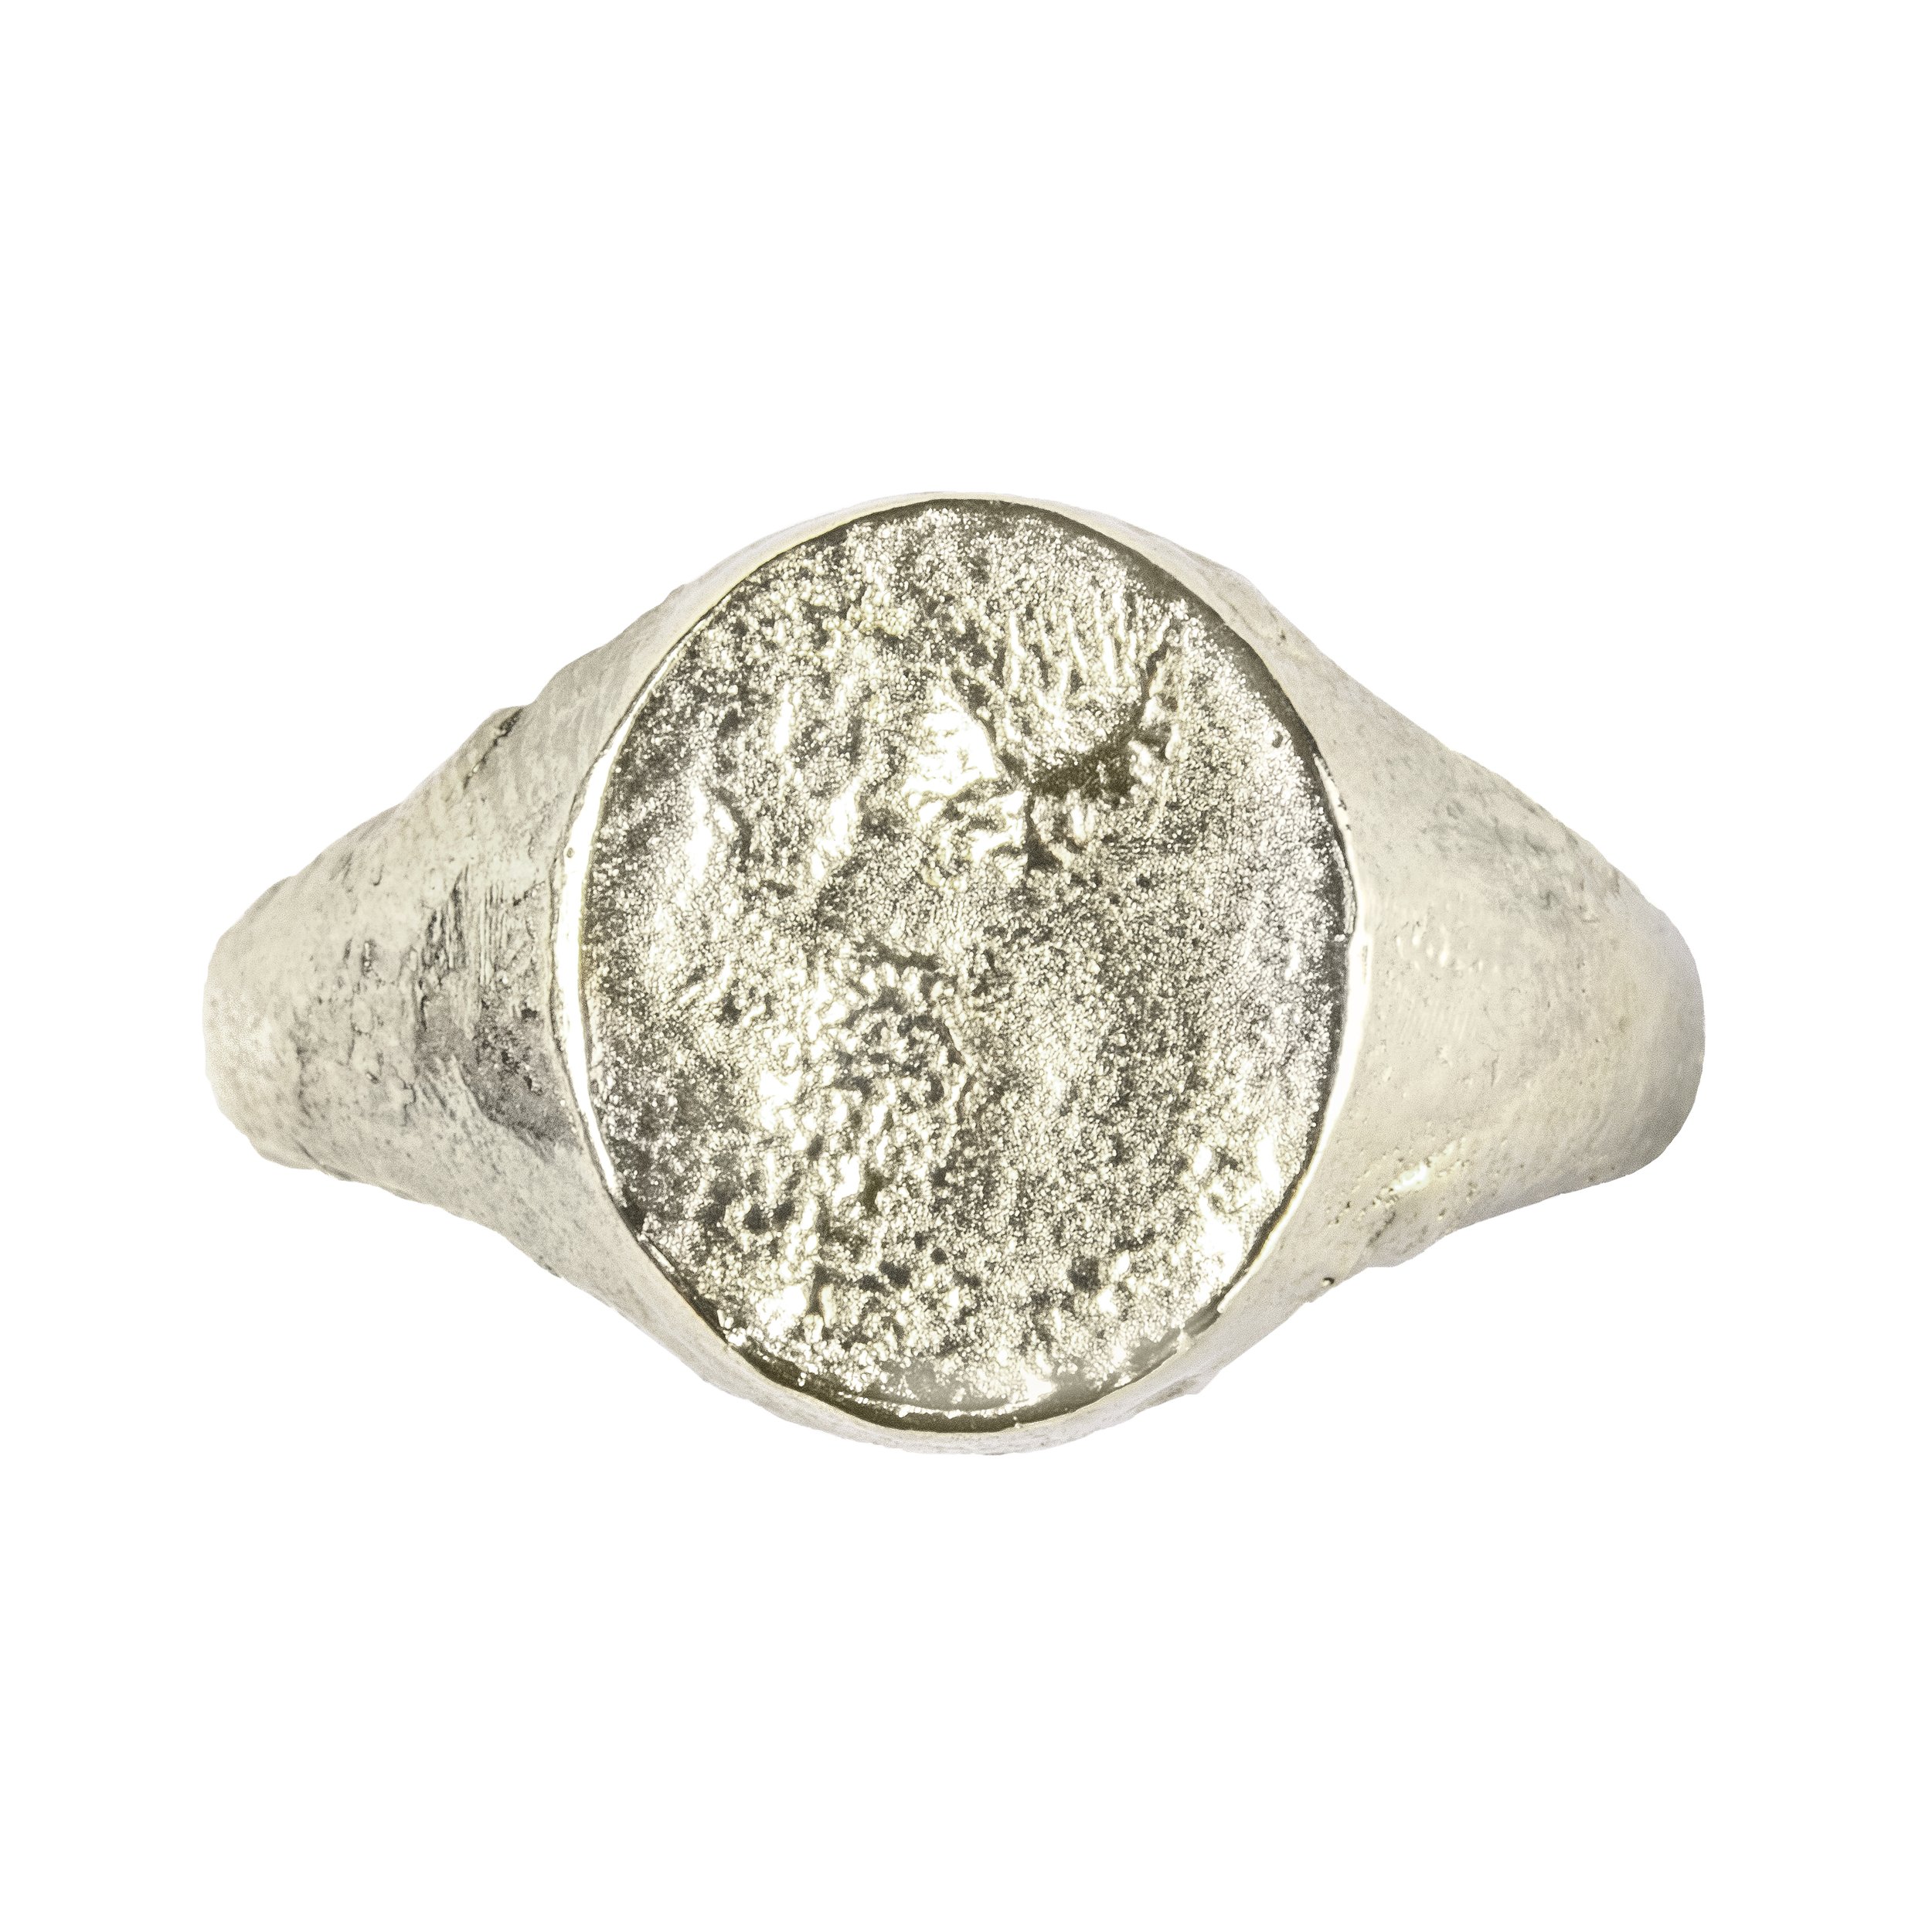 9ct white gold heavy weight signet ring